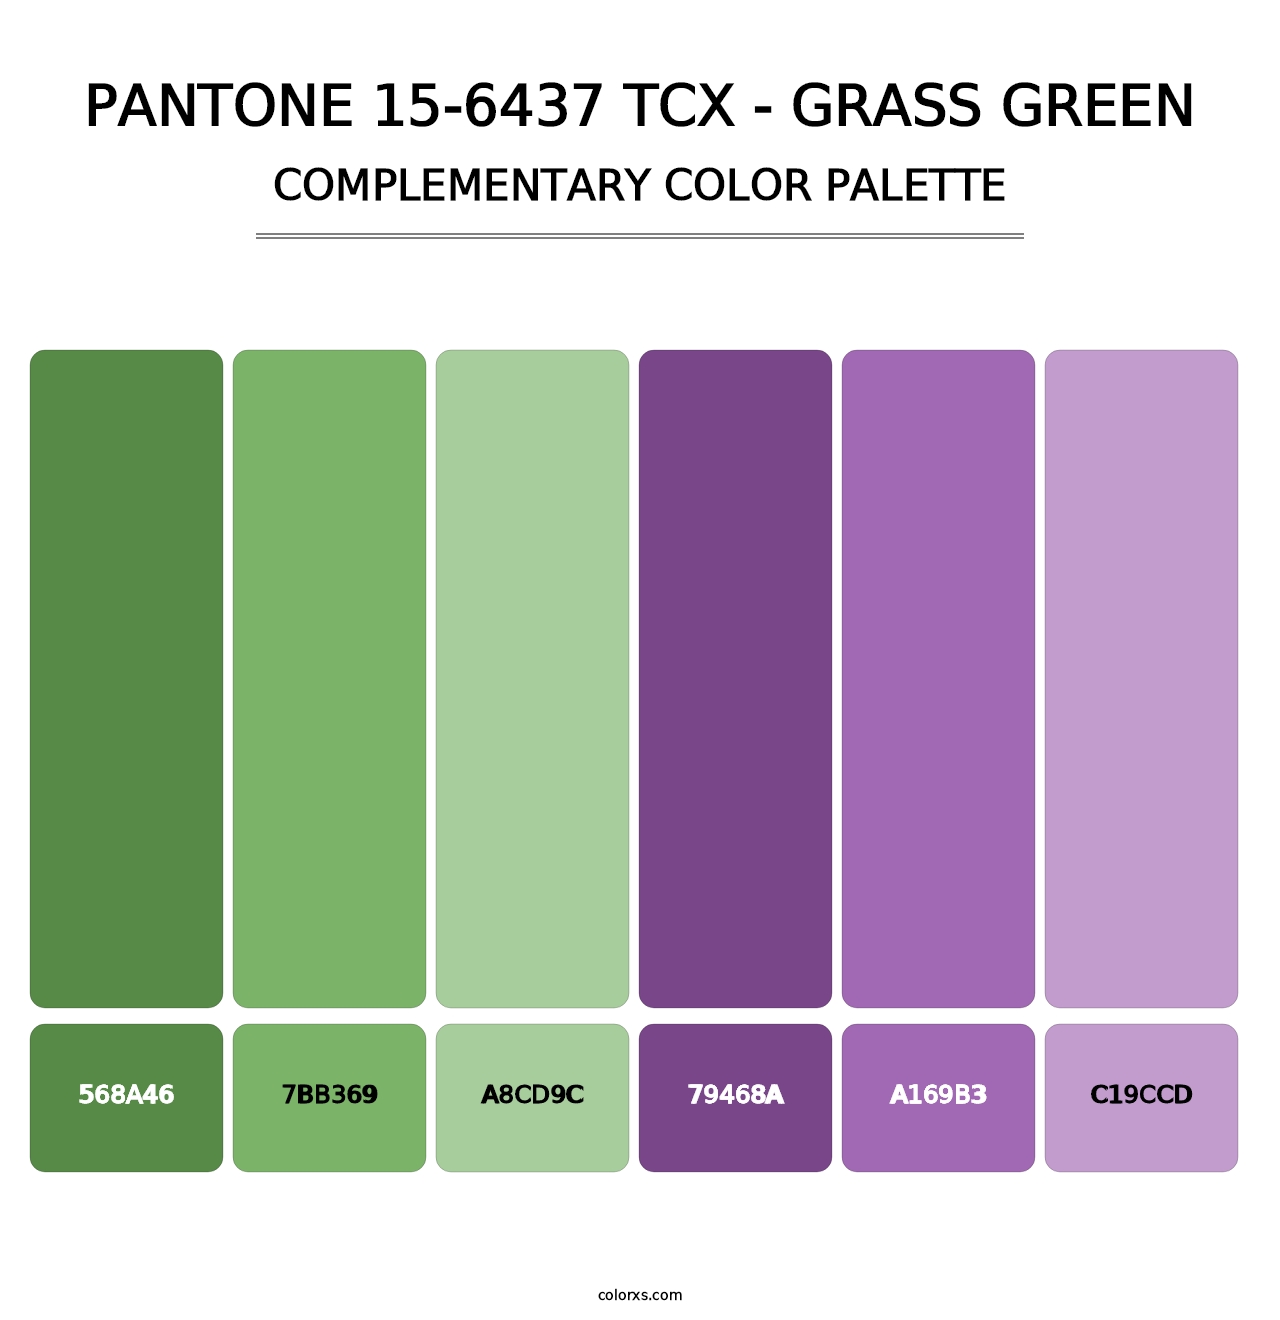 PANTONE 15-6437 TCX - Grass Green - Complementary Color Palette